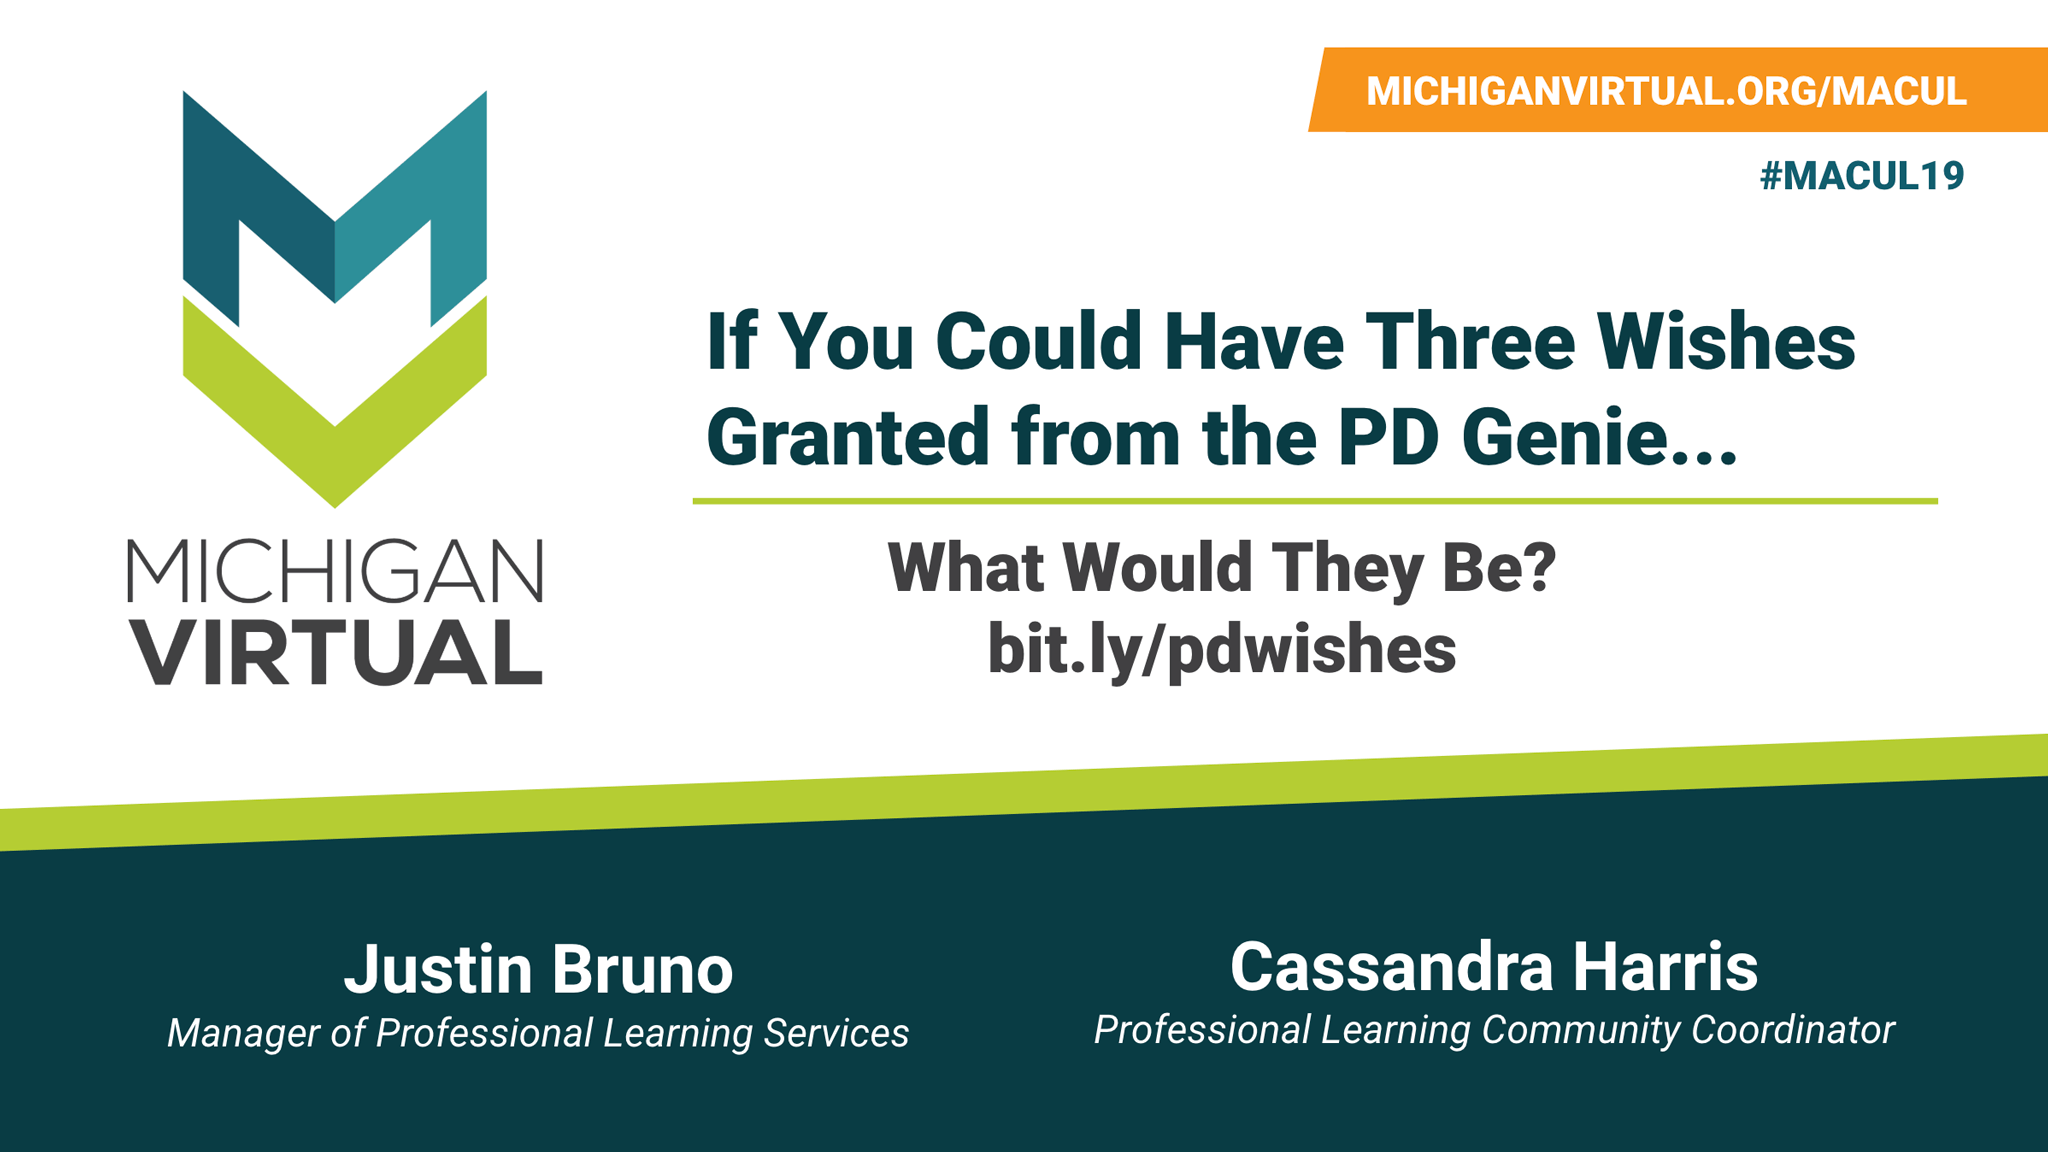 If Your Could Have Three Wishes Granted from the PD Genie, What Would They Be? Presentation Cover